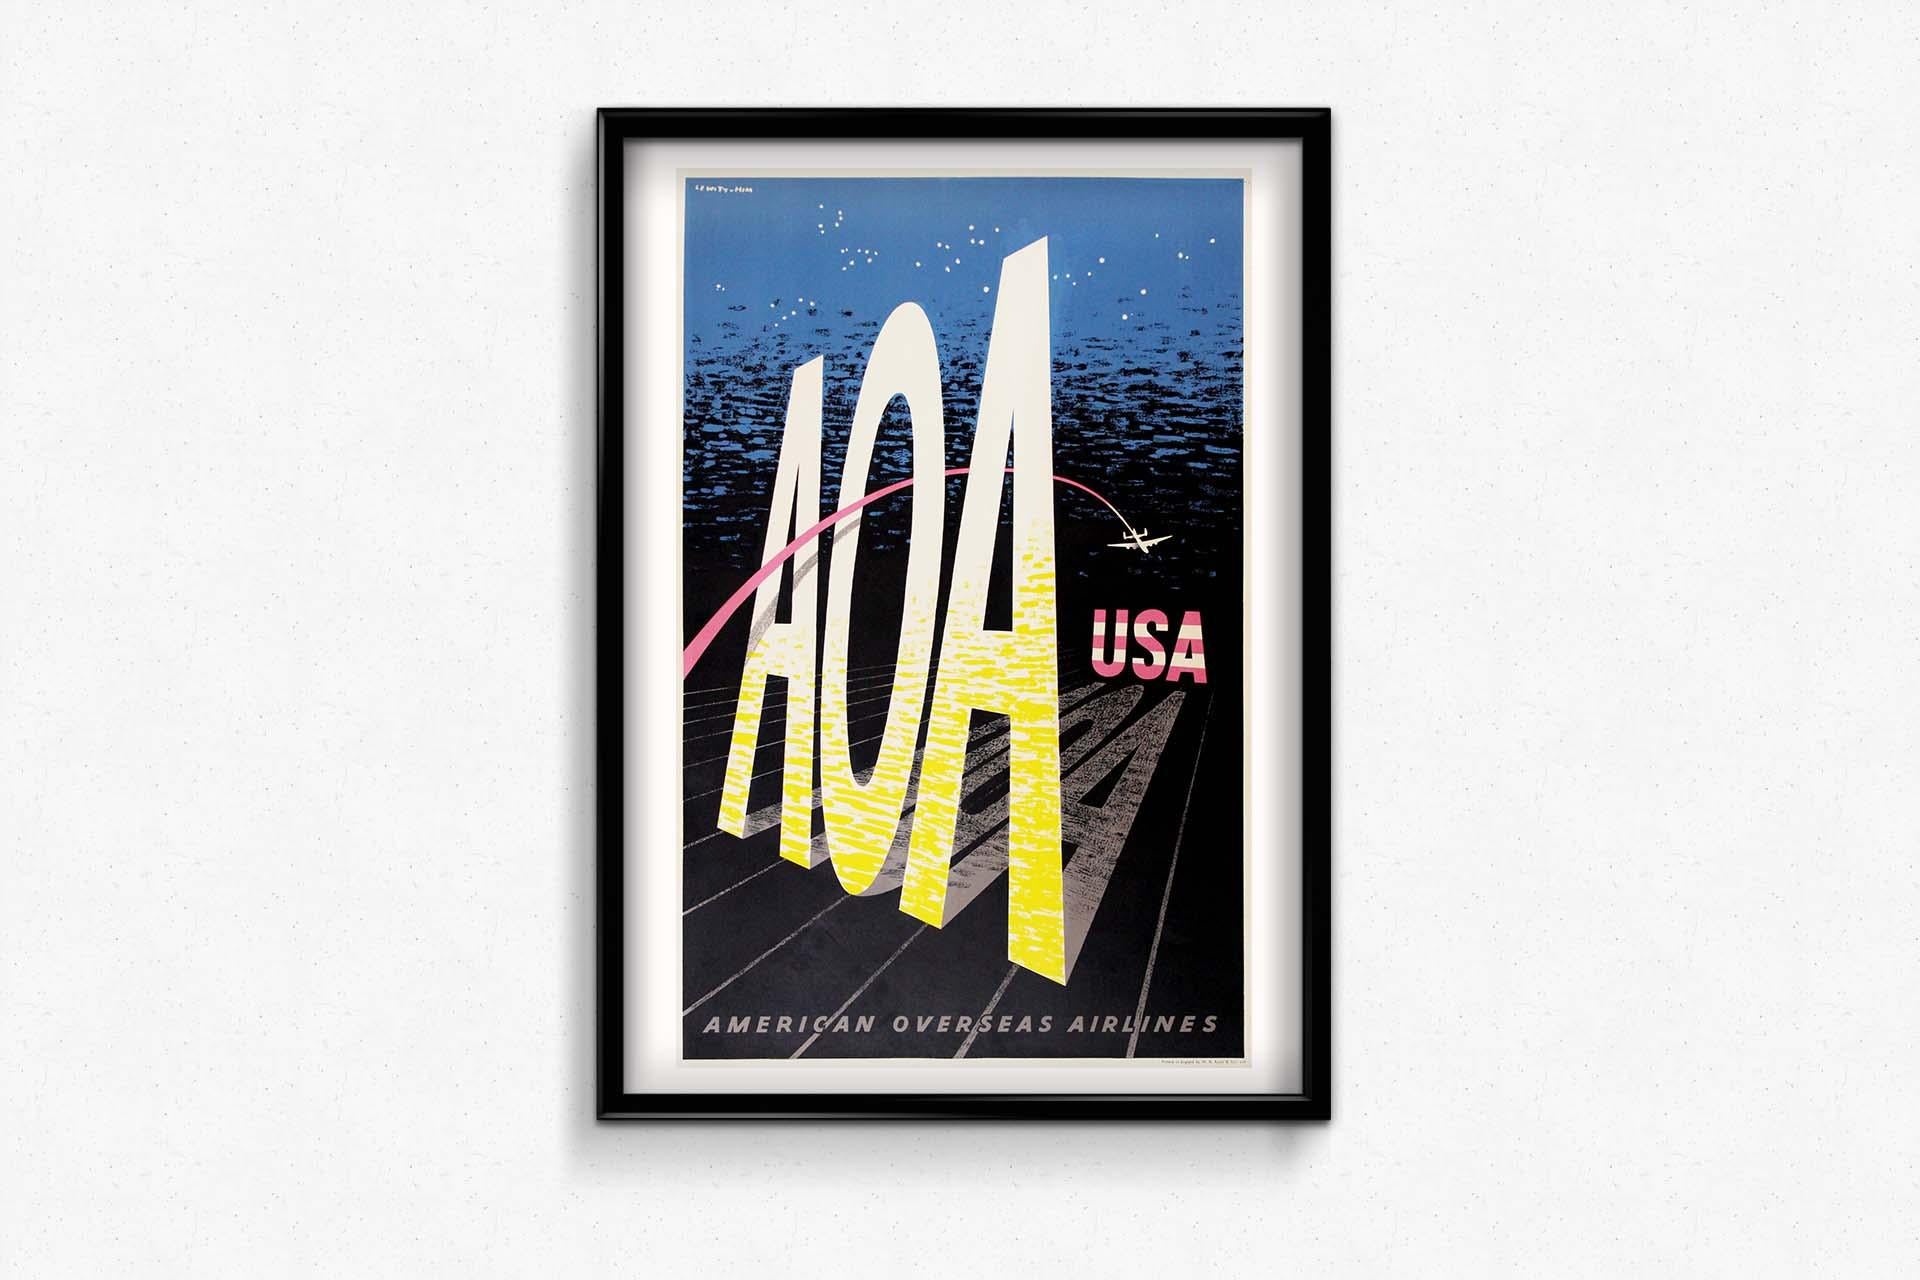 Step into the vibrant world of American travel with the circa 1950 original poster by Lewitt-Him for AOA (American Overseas Airlines). This stunning piece of vintage art invites you on a visual journey across the diverse landscapes of the United